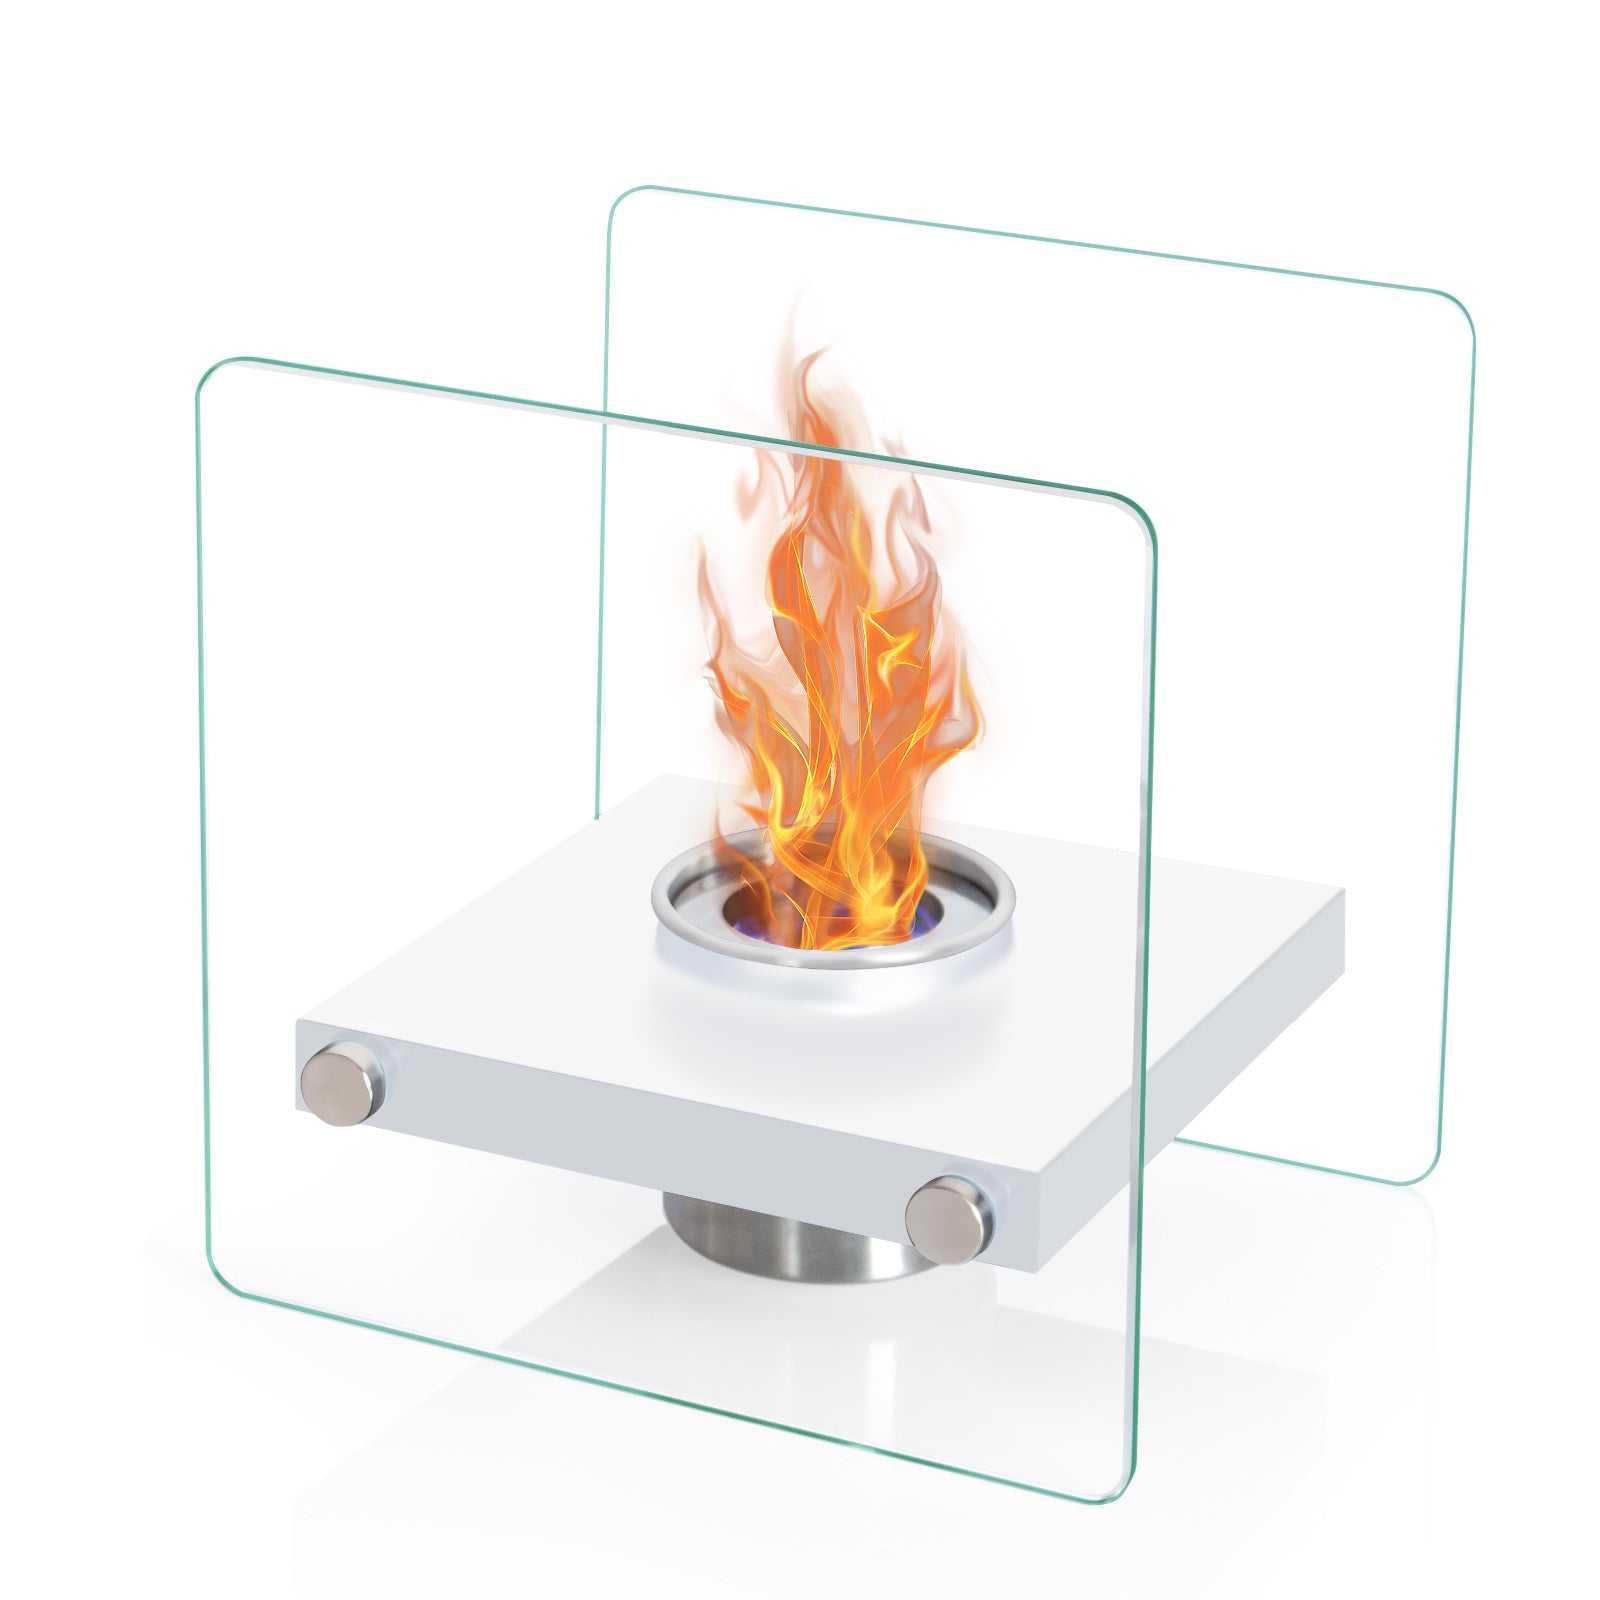 Todeco-Table-Fireplace-Bioethanol-Fireplace-Portable-Table-Fire-for-Outdoors-and-Indoors-Garden-Torch-and-Bioethanol-Fireplace-in-Stainless-Steel-White-Square-Table-Fireplace-White-Square